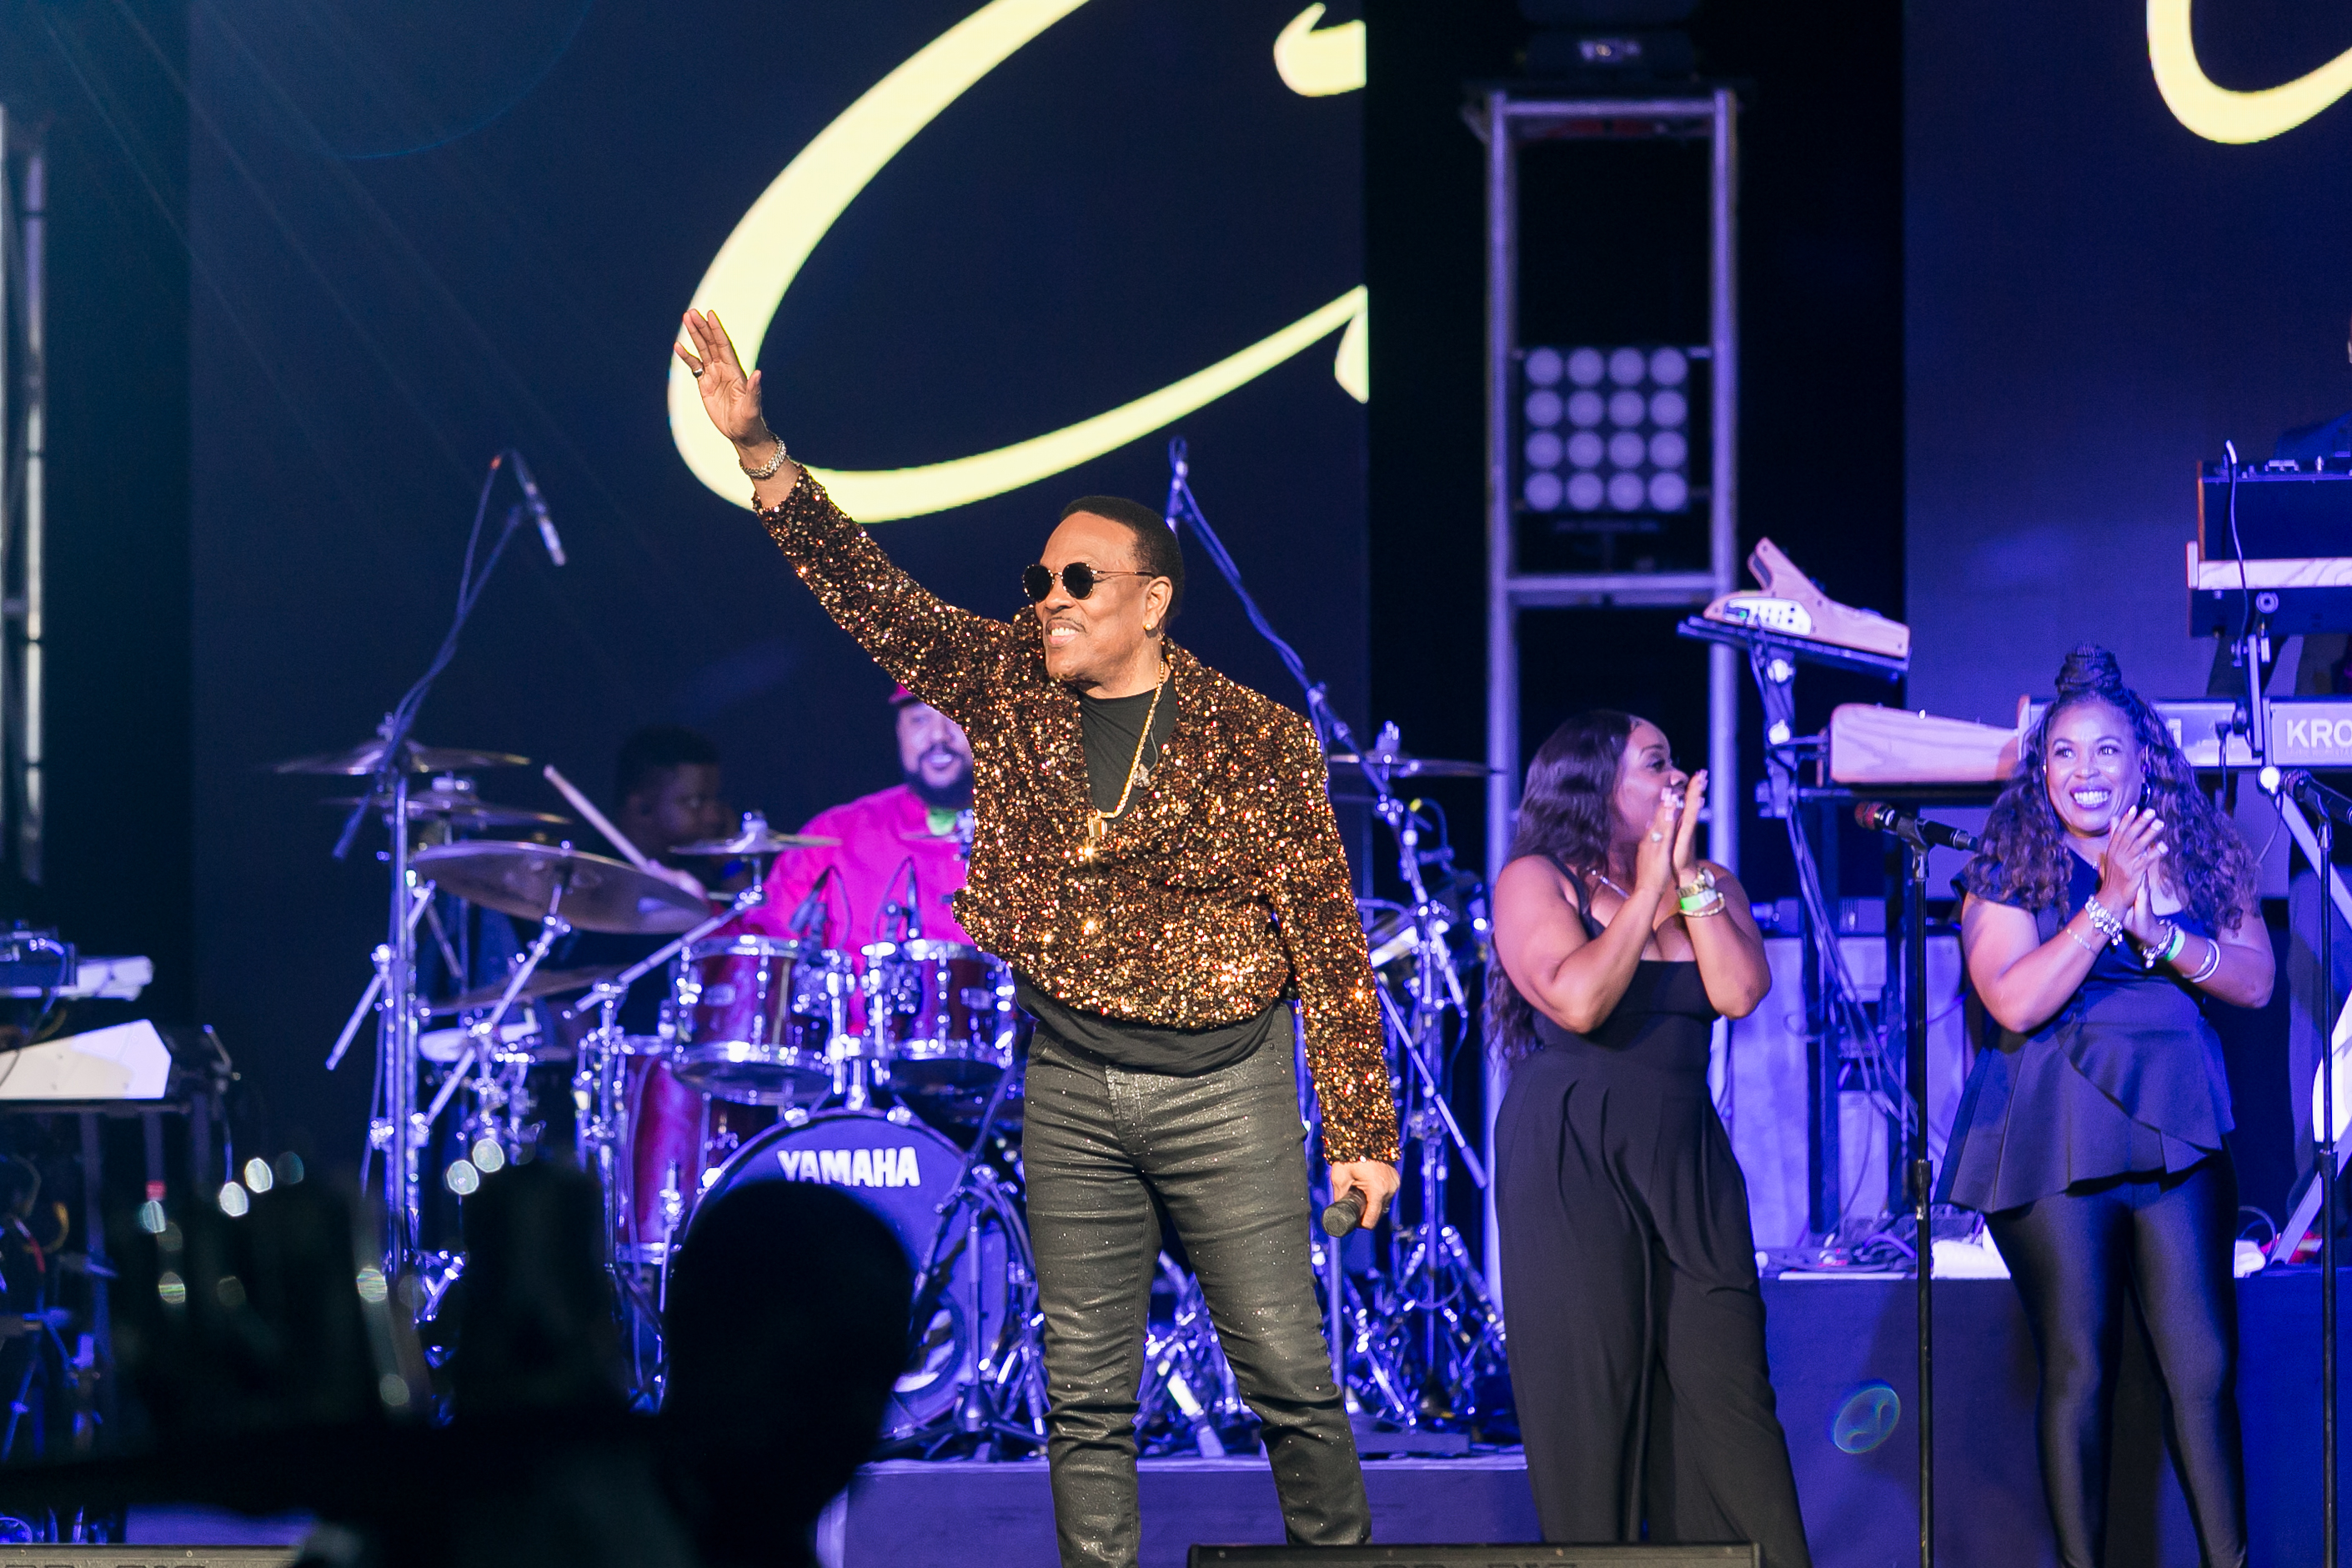 https://growthzonecmsprodeastus.azureedge.net/sites/1843/2023/02/Charlie-Wilson-Performing-at-Vision-and-Action-de10d822-4774-415e-b7b7-ee8219795cdd.jpg